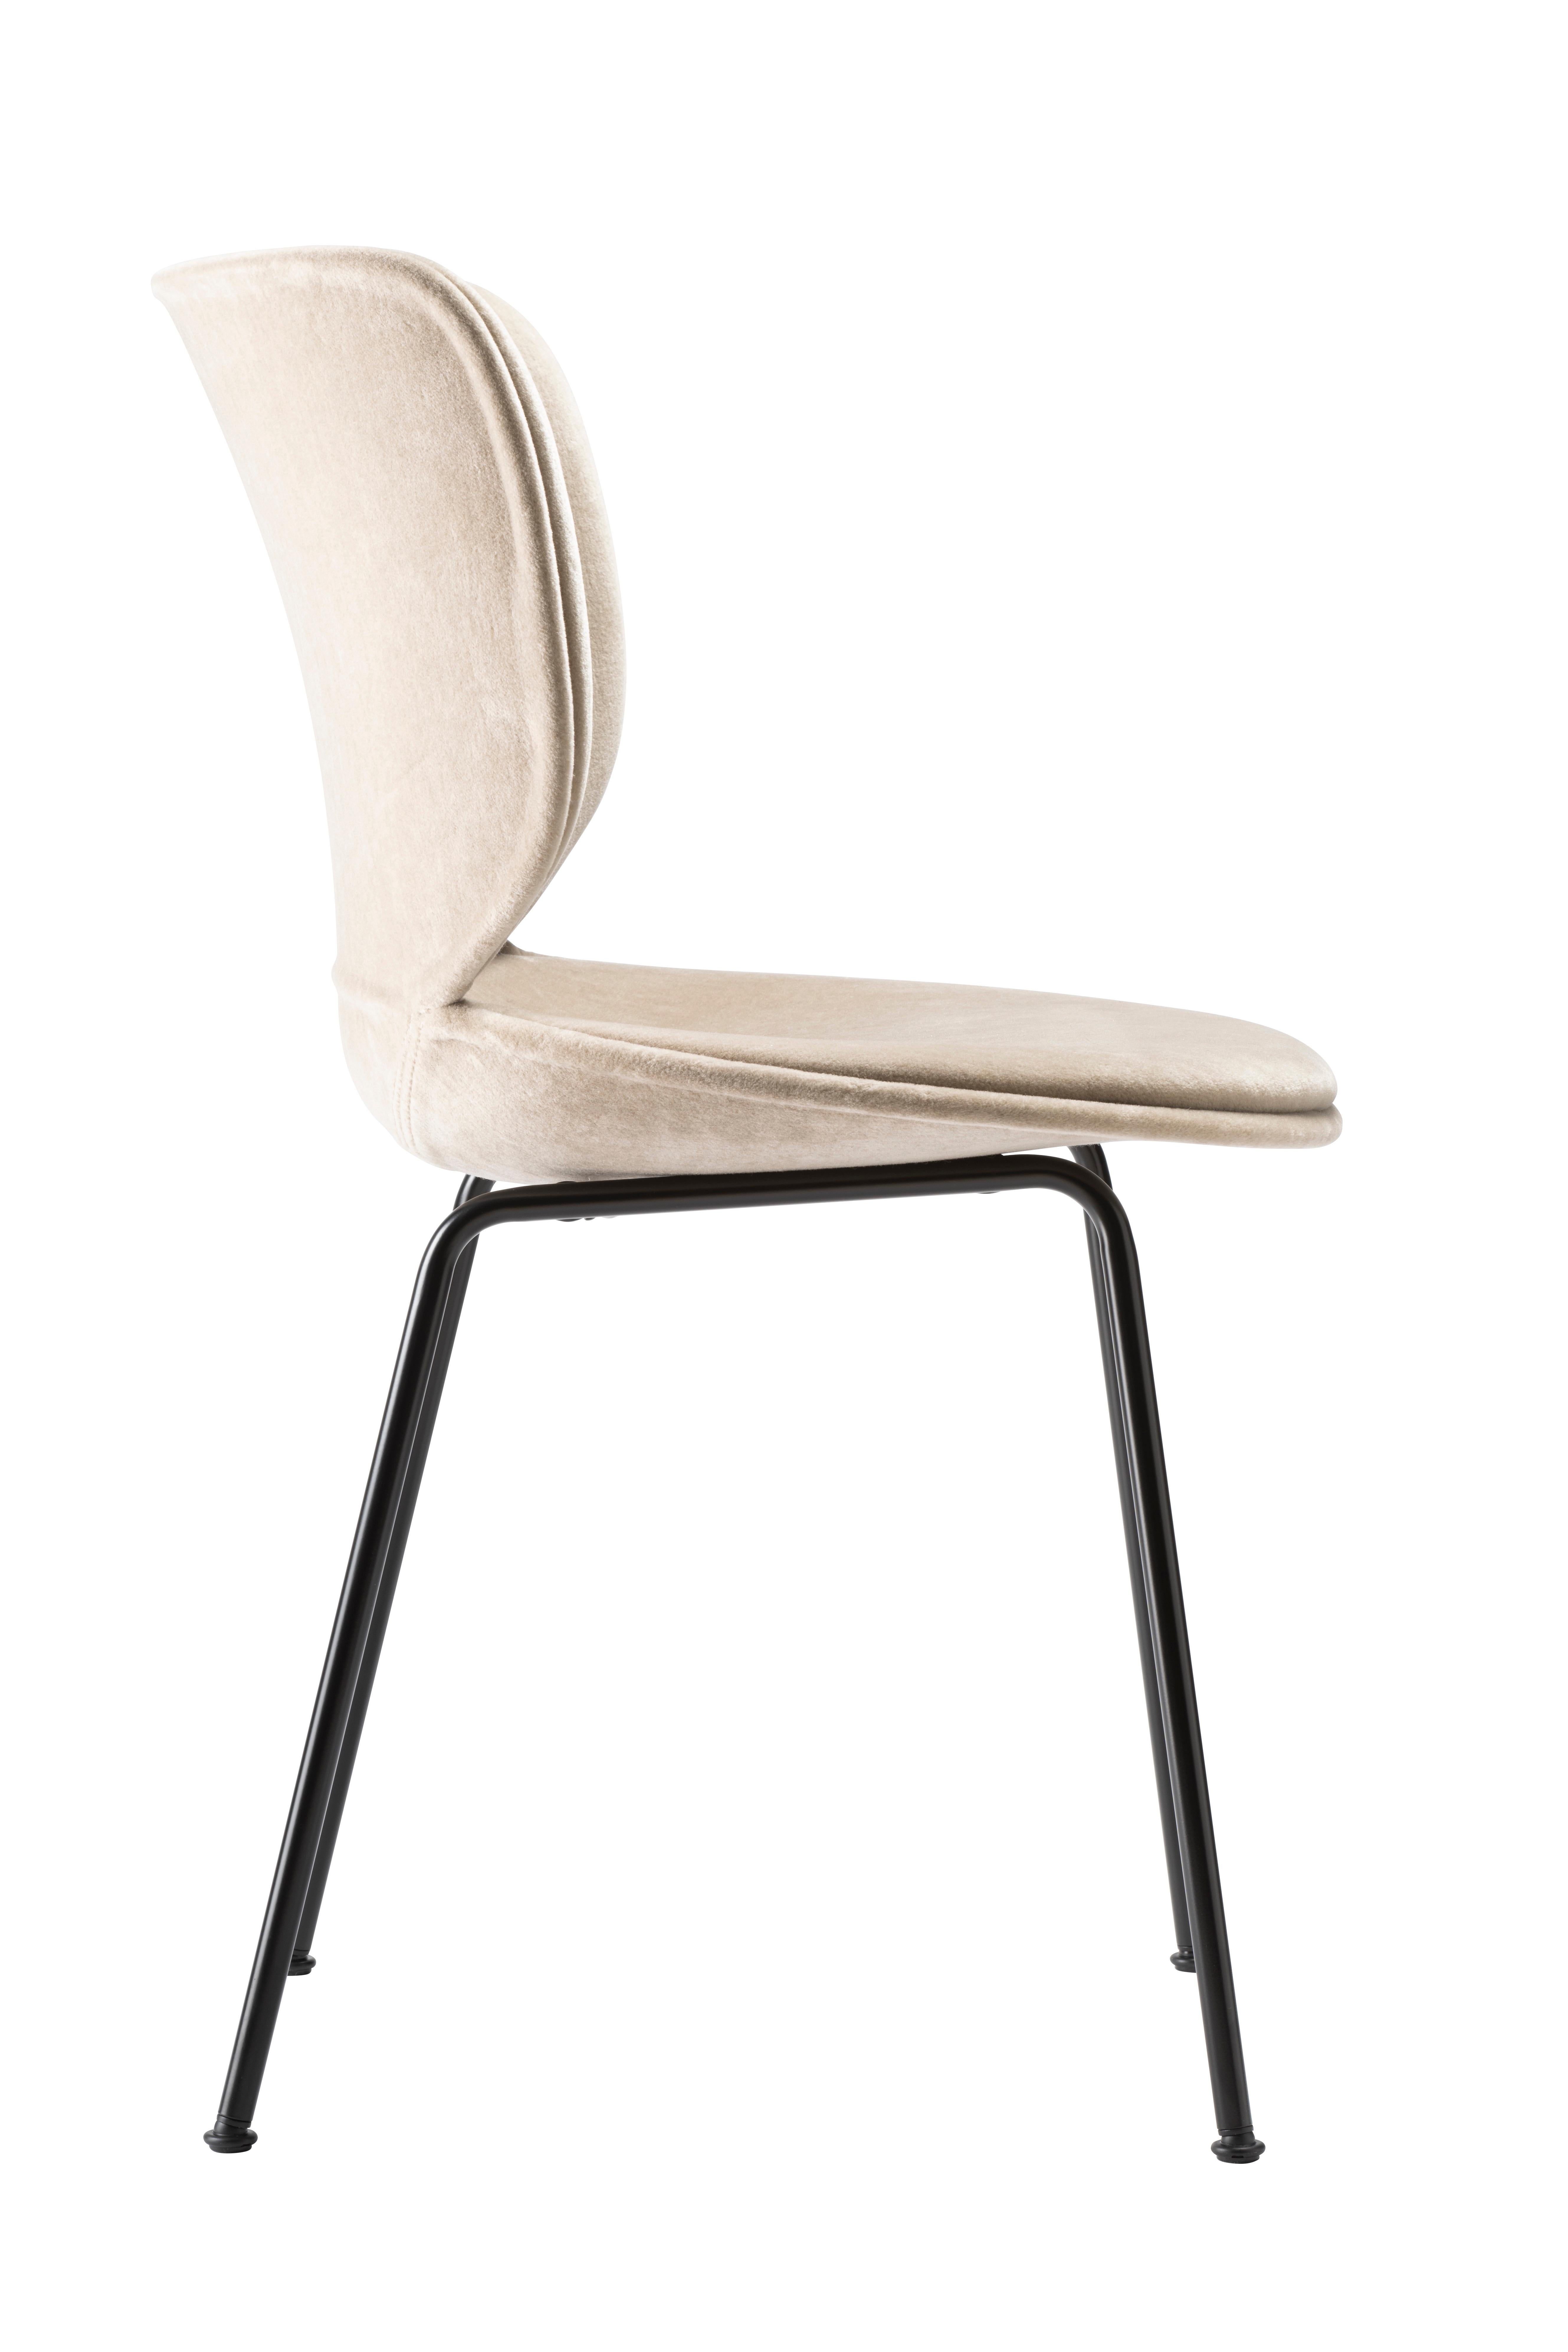 Moooi set of 2 Hana Chair by Simone Bonanni In New Condition For Sale In Brooklyn, NY